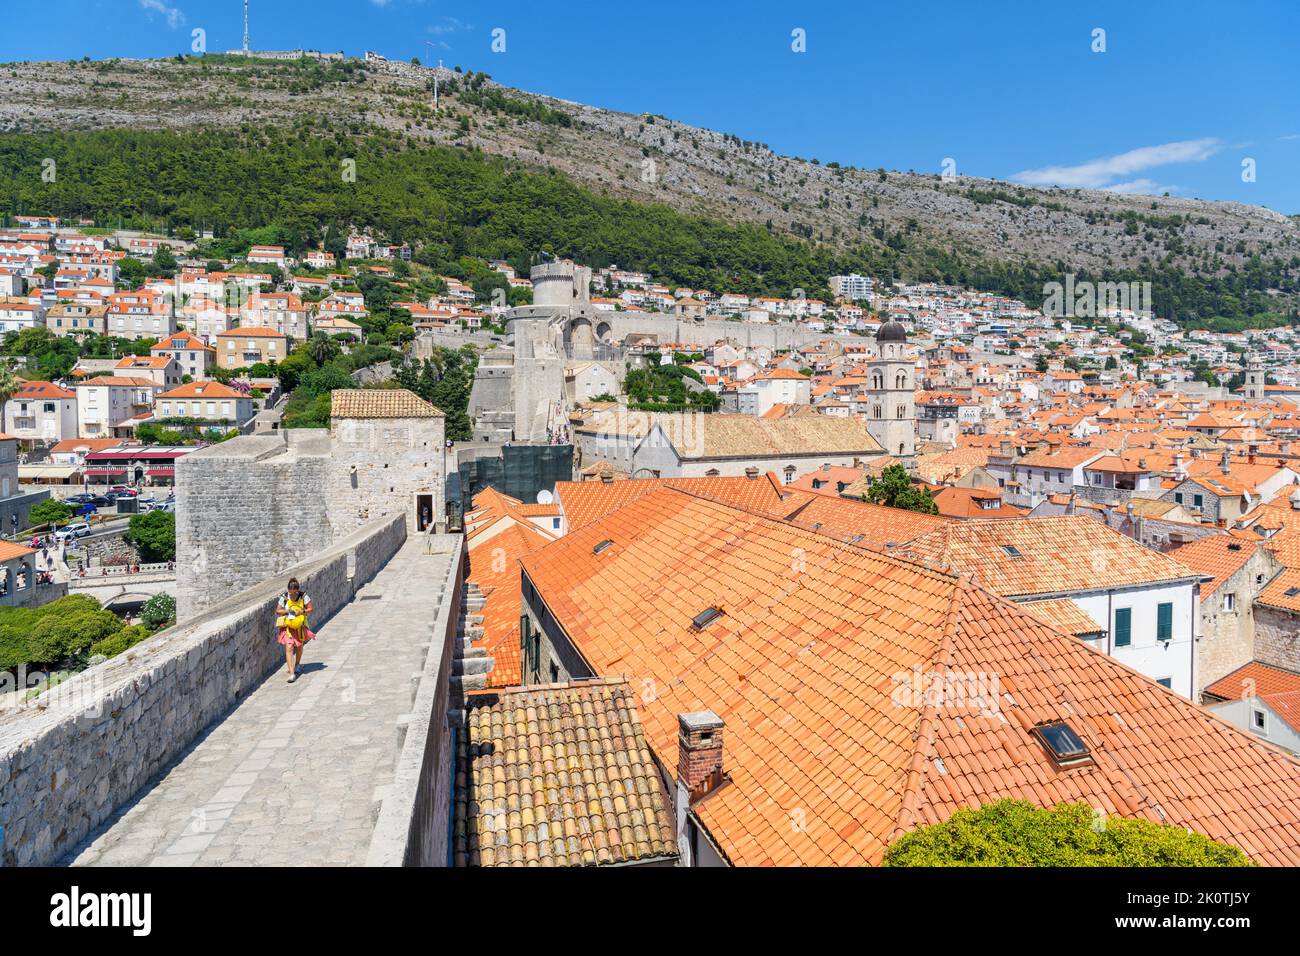 View over the rooftops towards the Pile Gate from the walls of the Old Town, Dubrovnik, Croatia Stock Photo